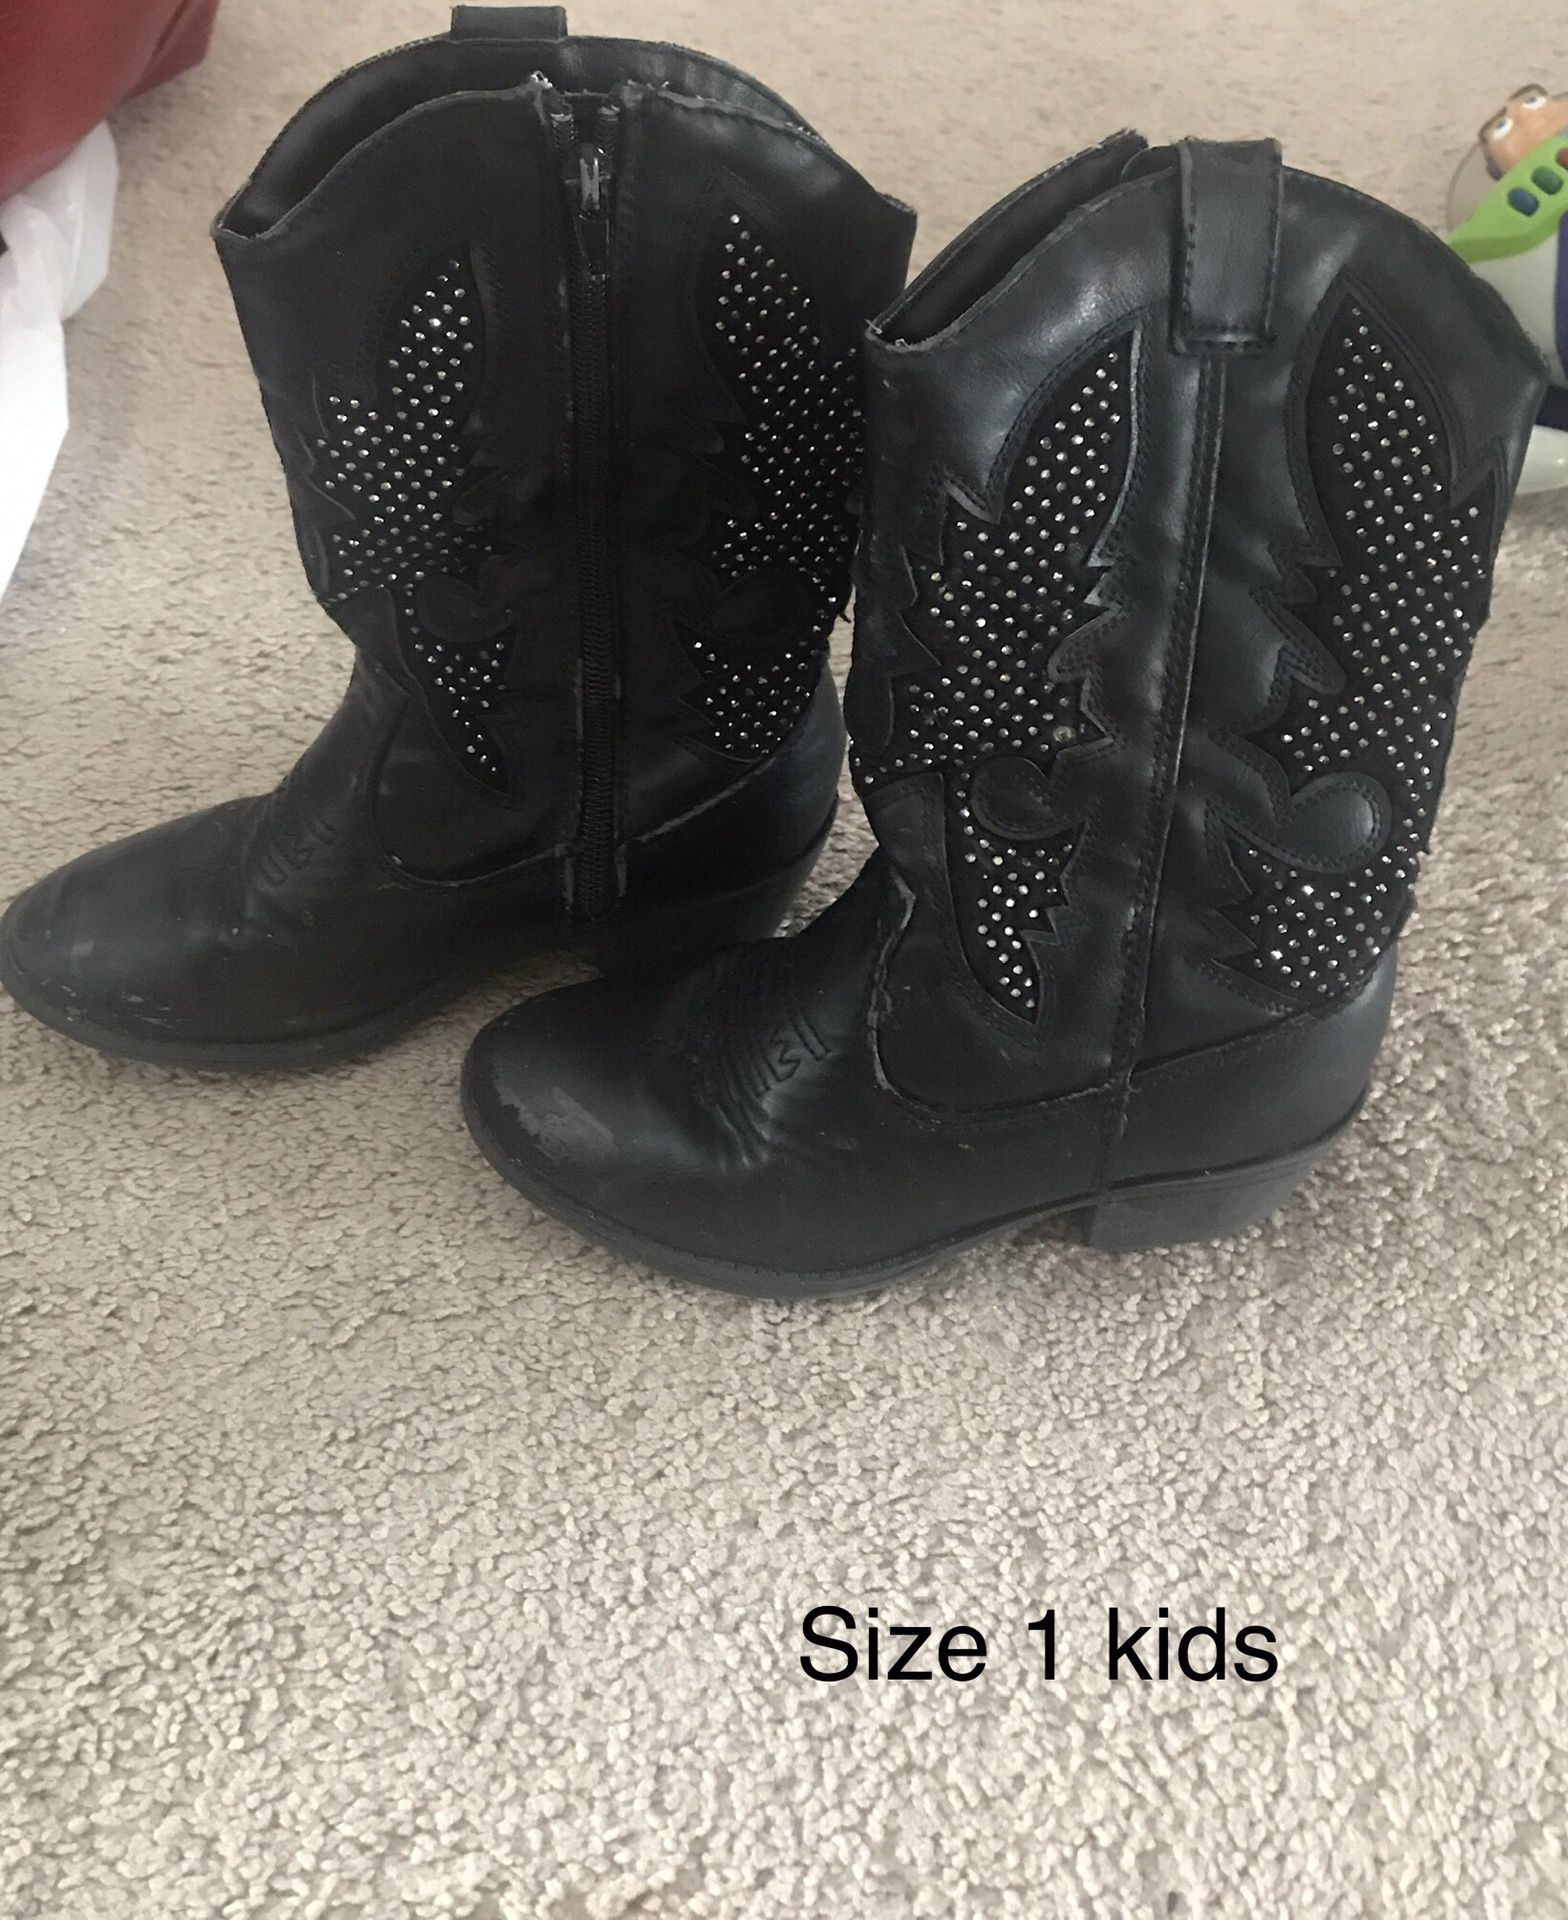 Girls size 1 black boots